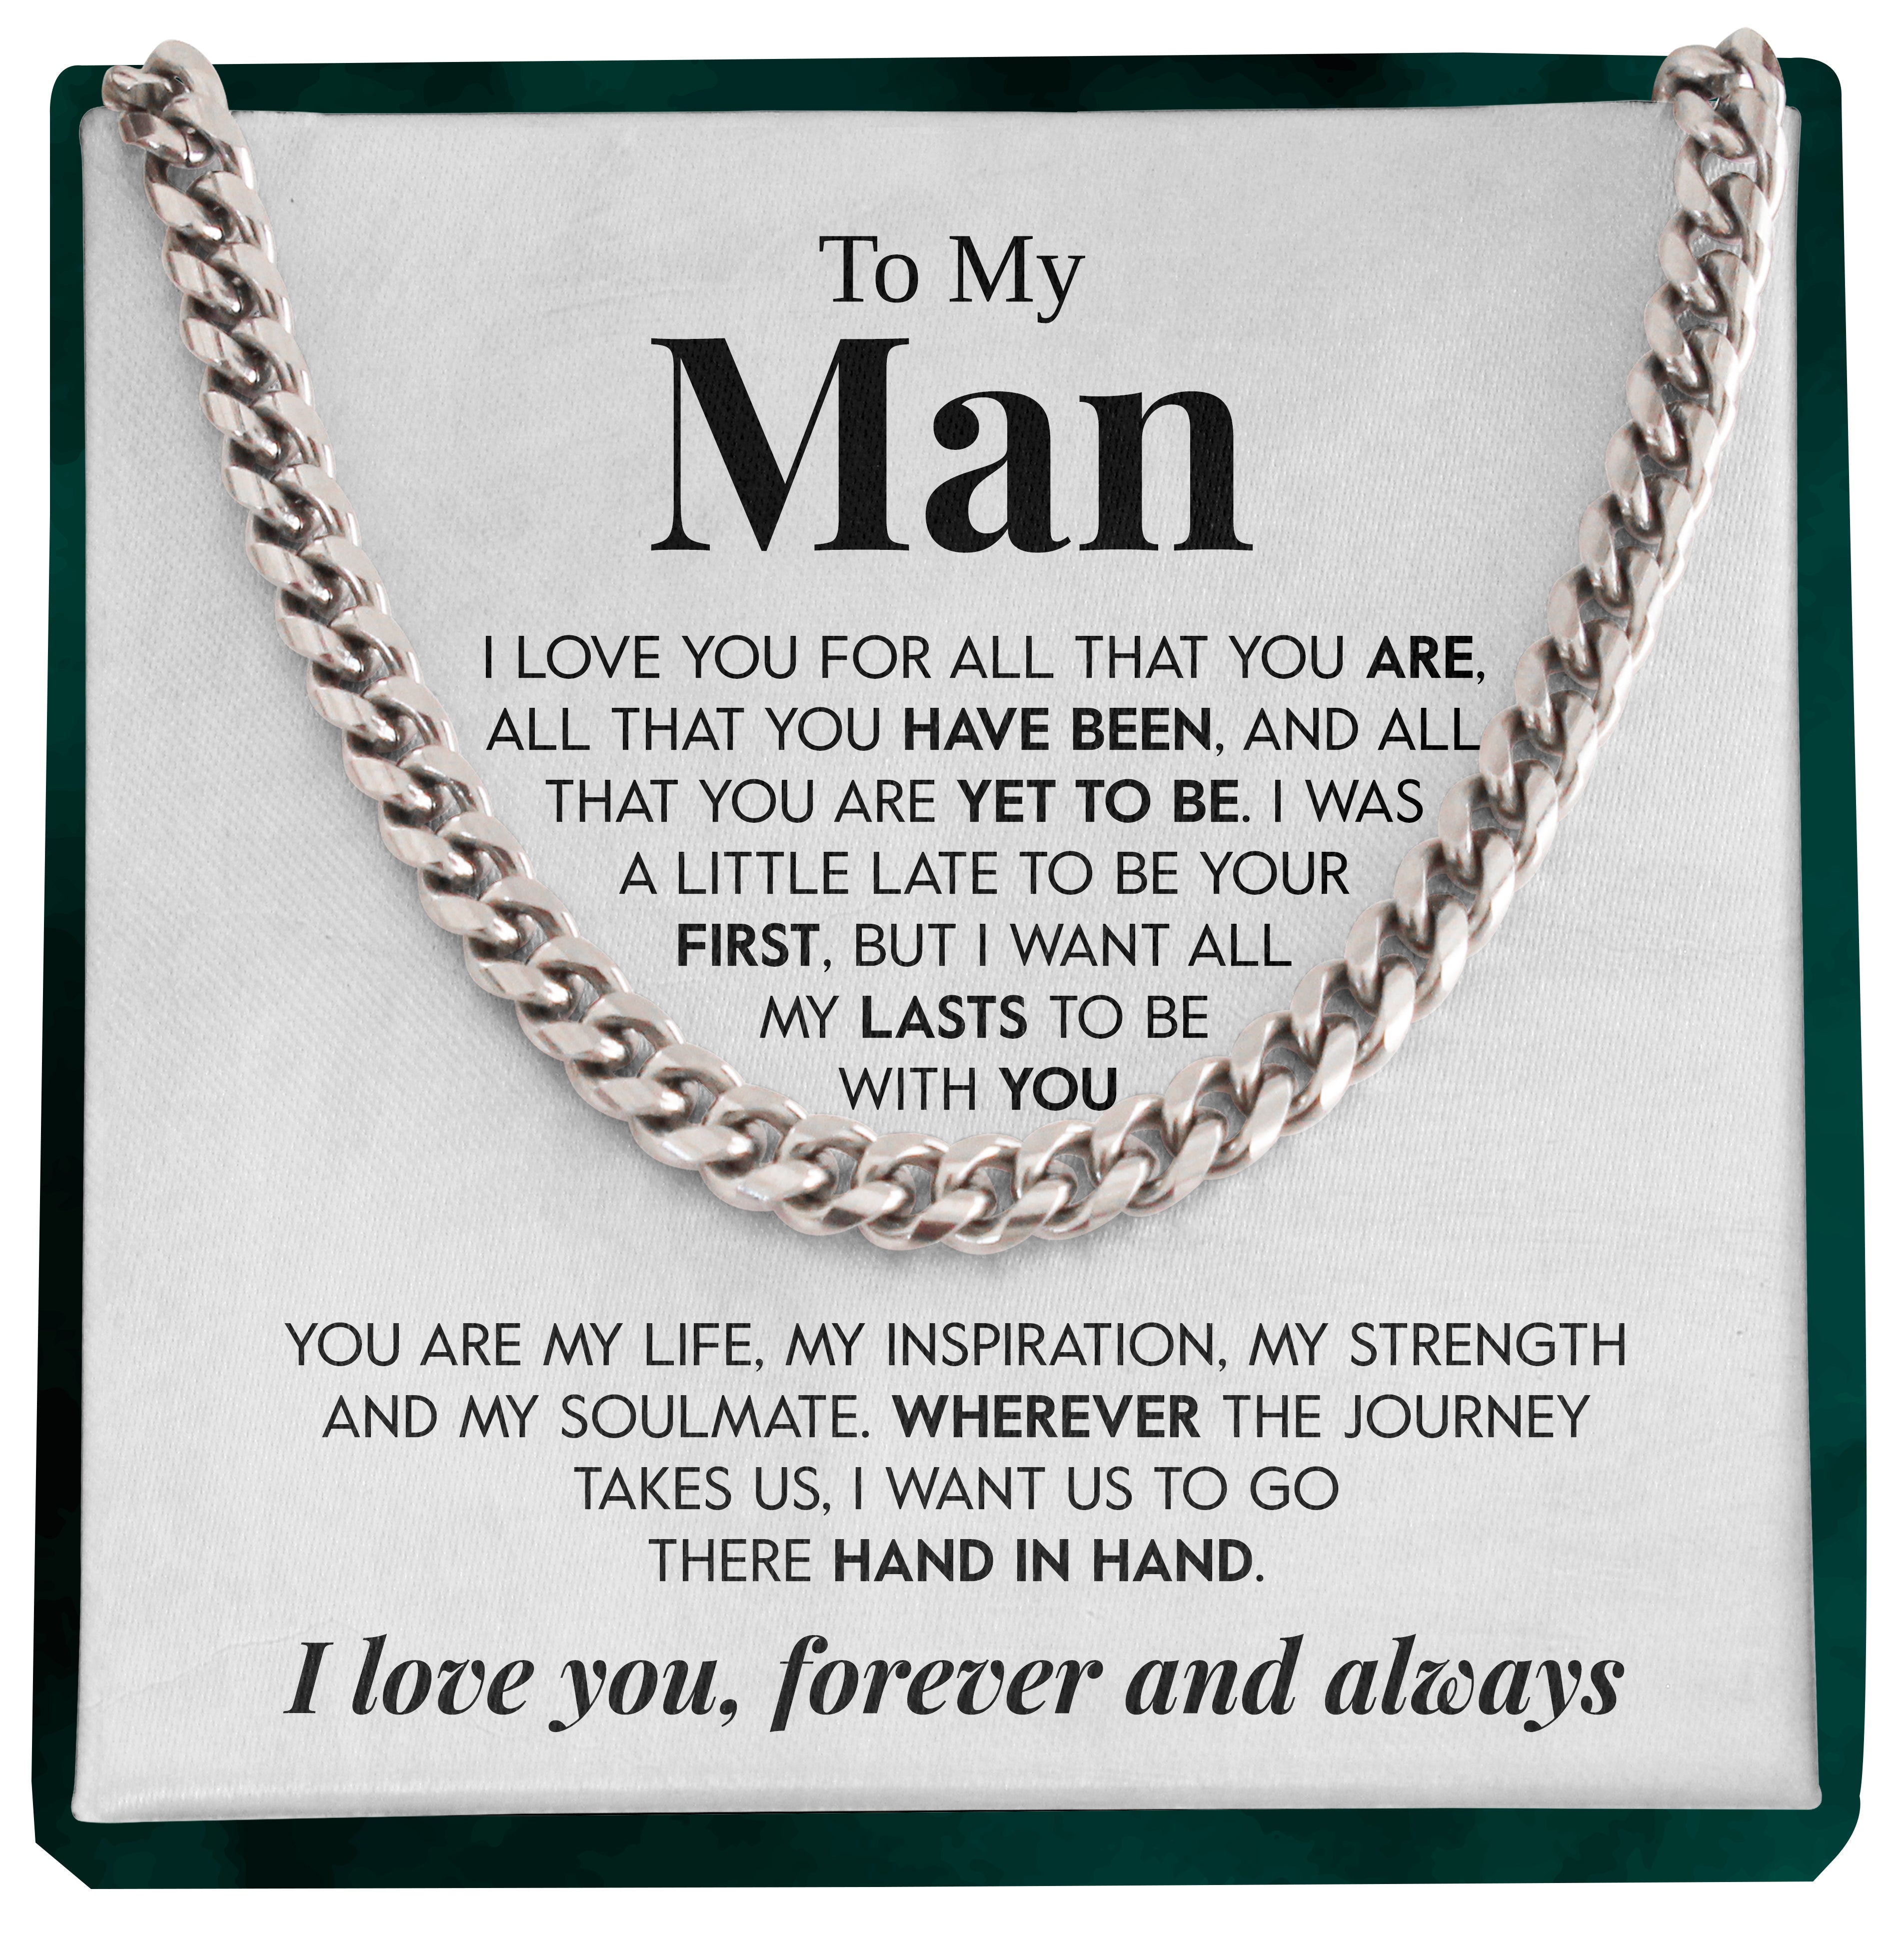 To My Man | "Hand in Hand" | Cuban Chain Link